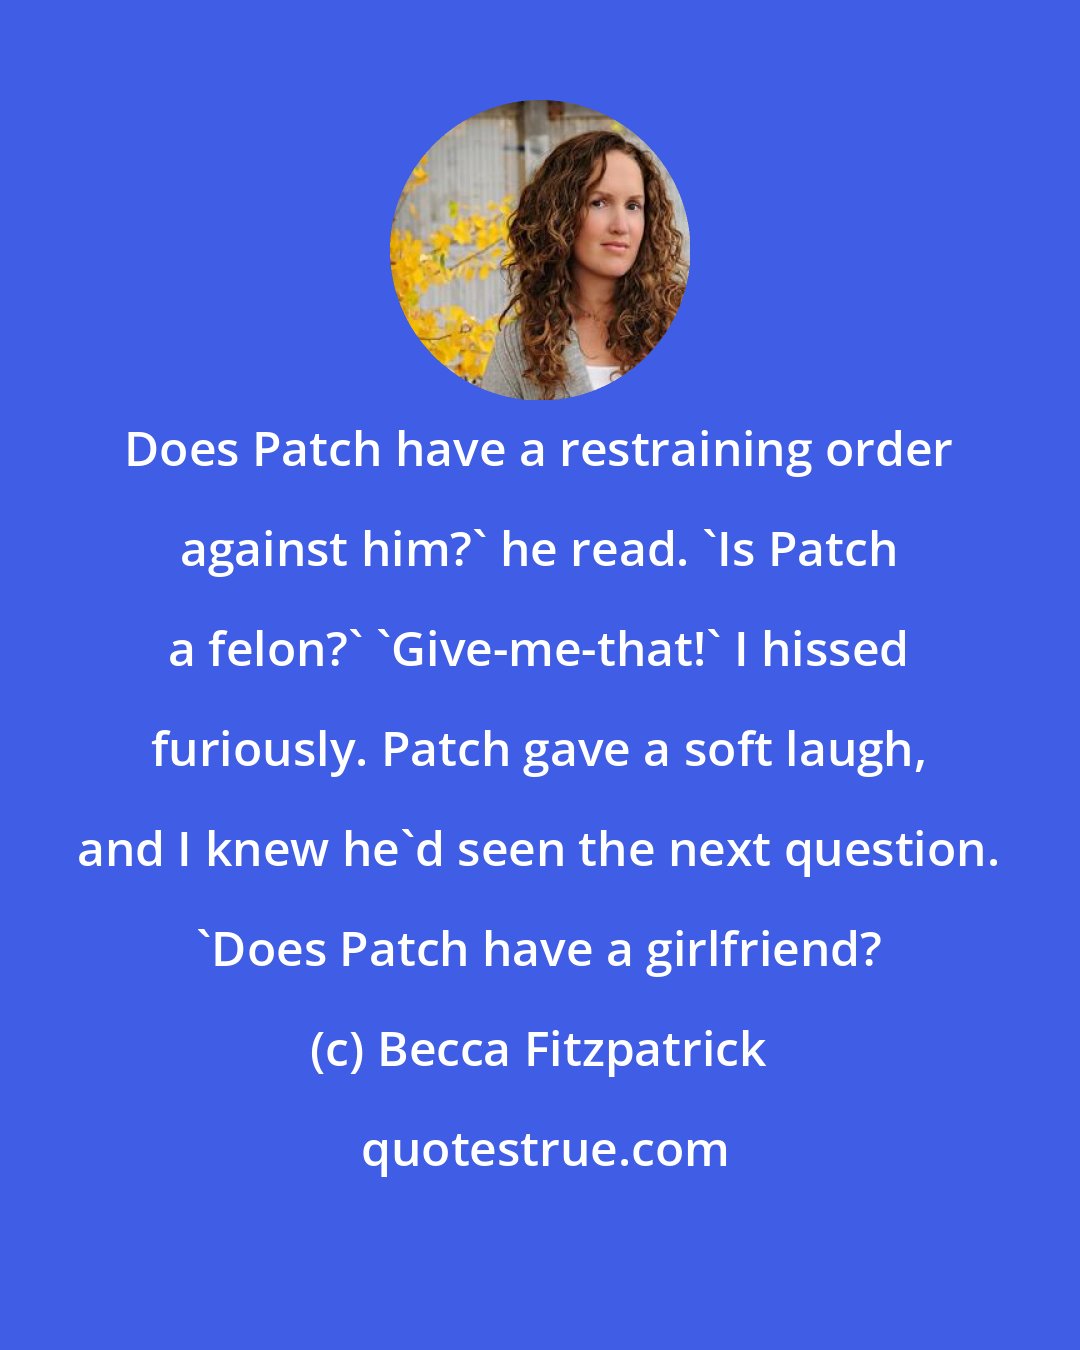 Becca Fitzpatrick: Does Patch have a restraining order against him?' he read. 'Is Patch a felon?' 'Give-me-that!' I hissed furiously. Patch gave a soft laugh, and I knew he'd seen the next question. 'Does Patch have a girlfriend?